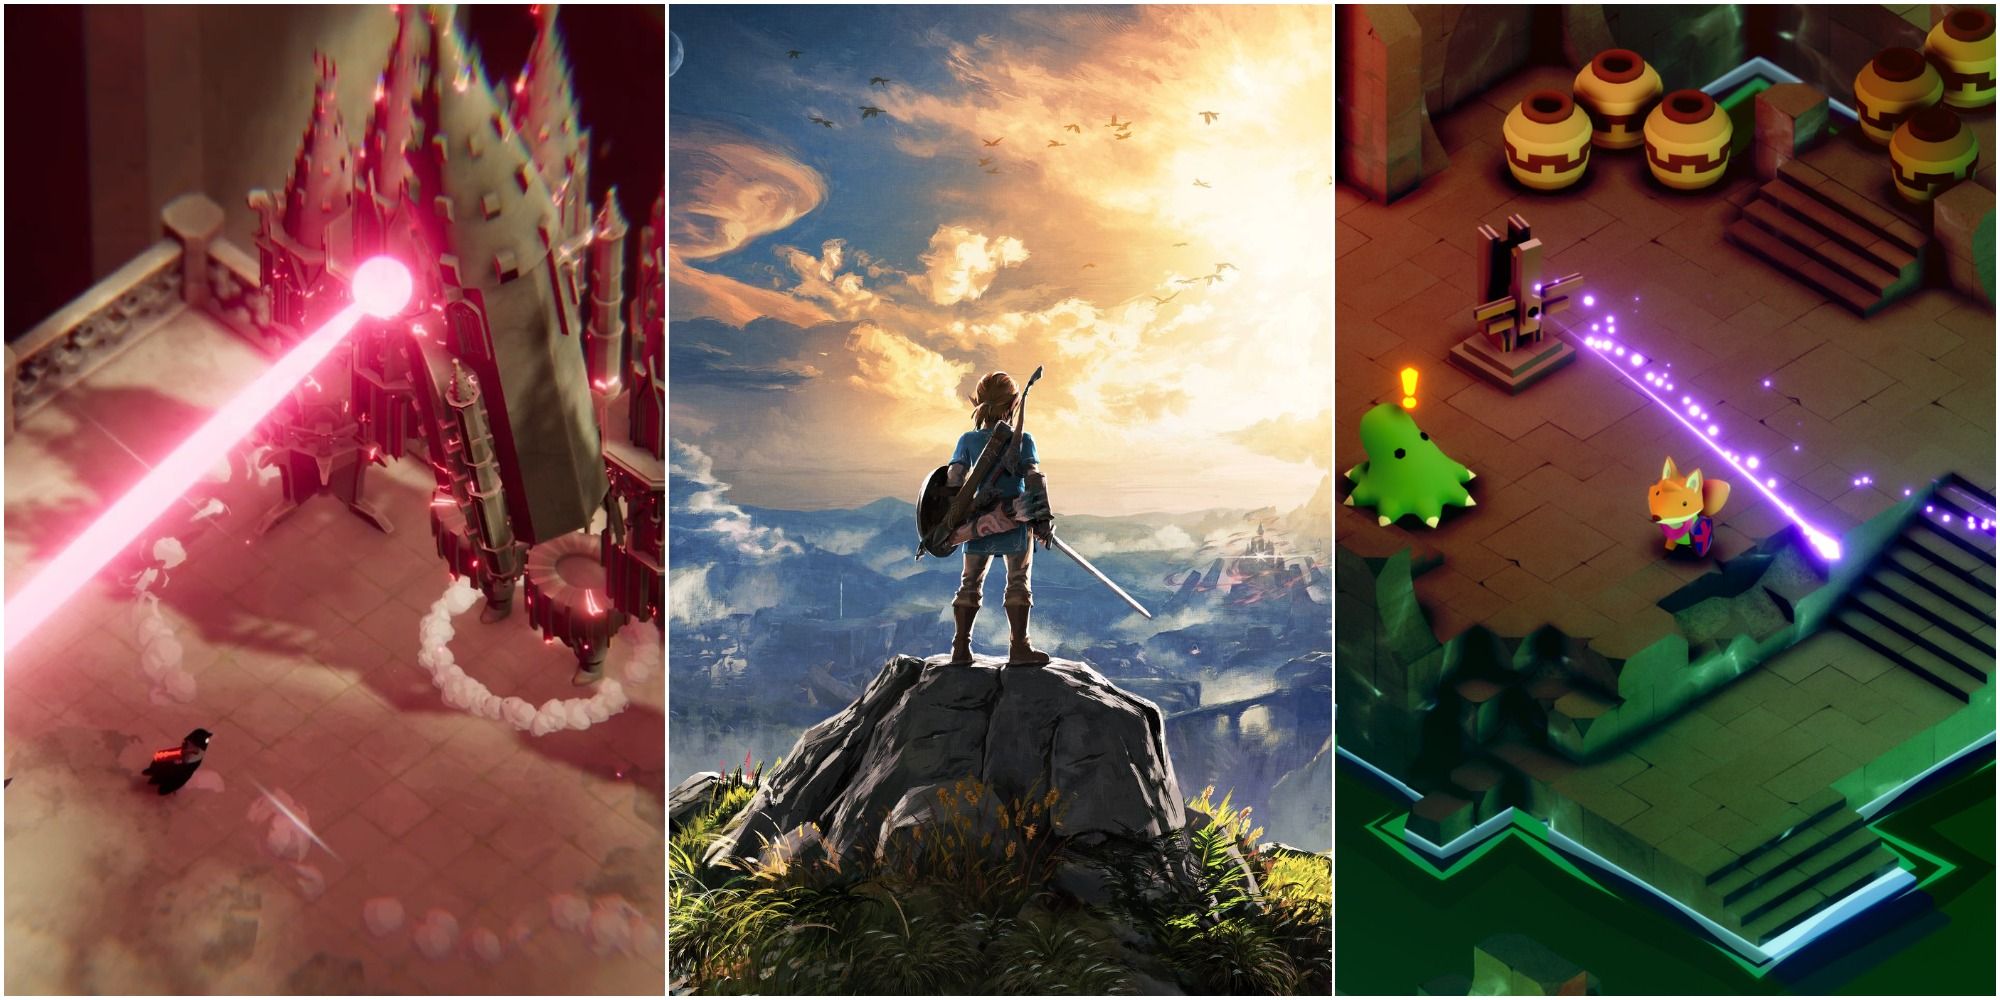 A collage showing the cover art for The Legend of Zelda: Breath of the Wild along with gameplay from Death's Door and Tunic